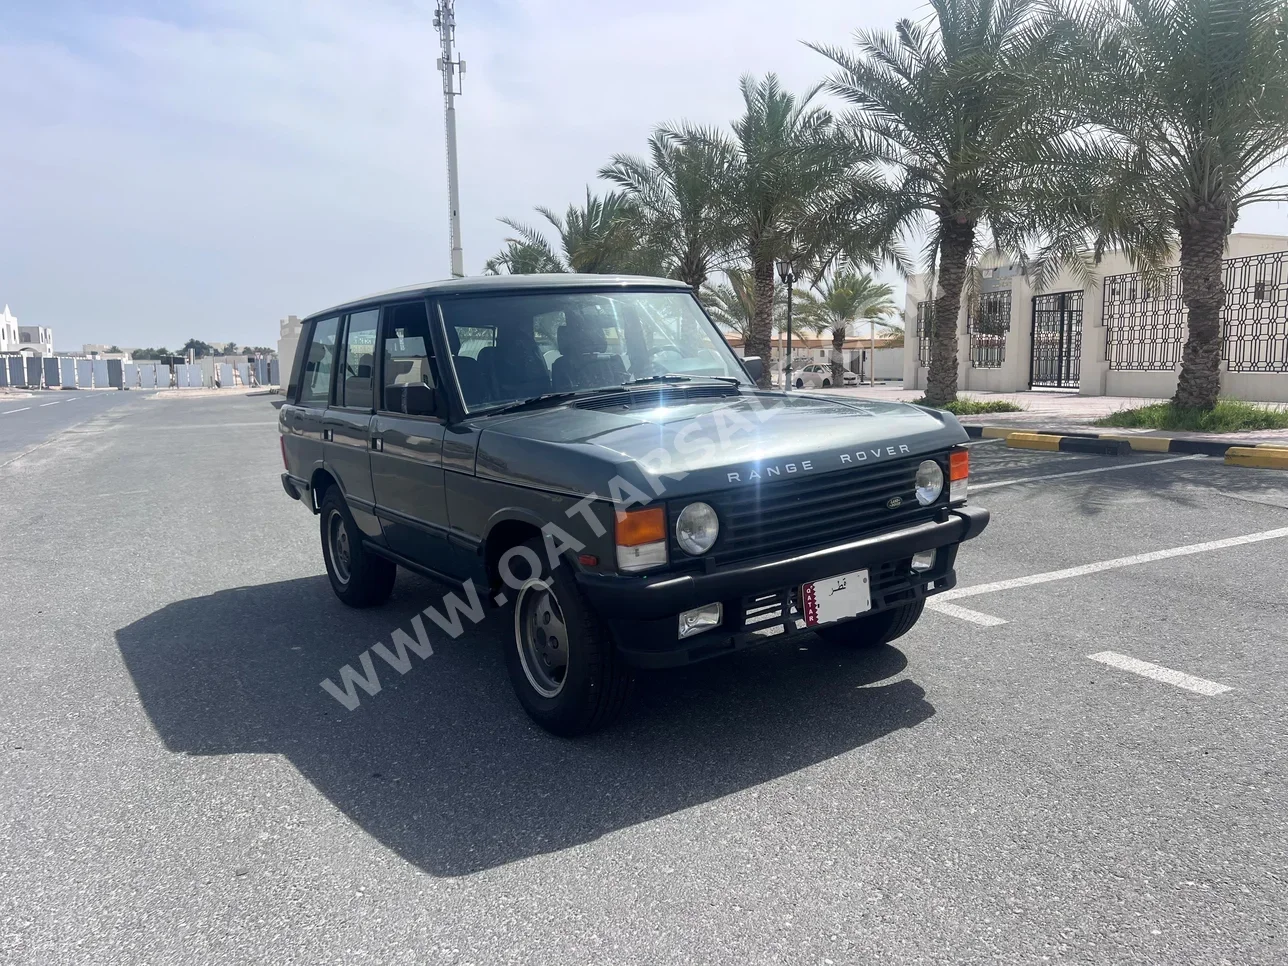 Land Rover  Range Rover  1990  Automatic  338,000 Km  8 Cylinder  Four Wheel Drive (4WD)  SUV  Green